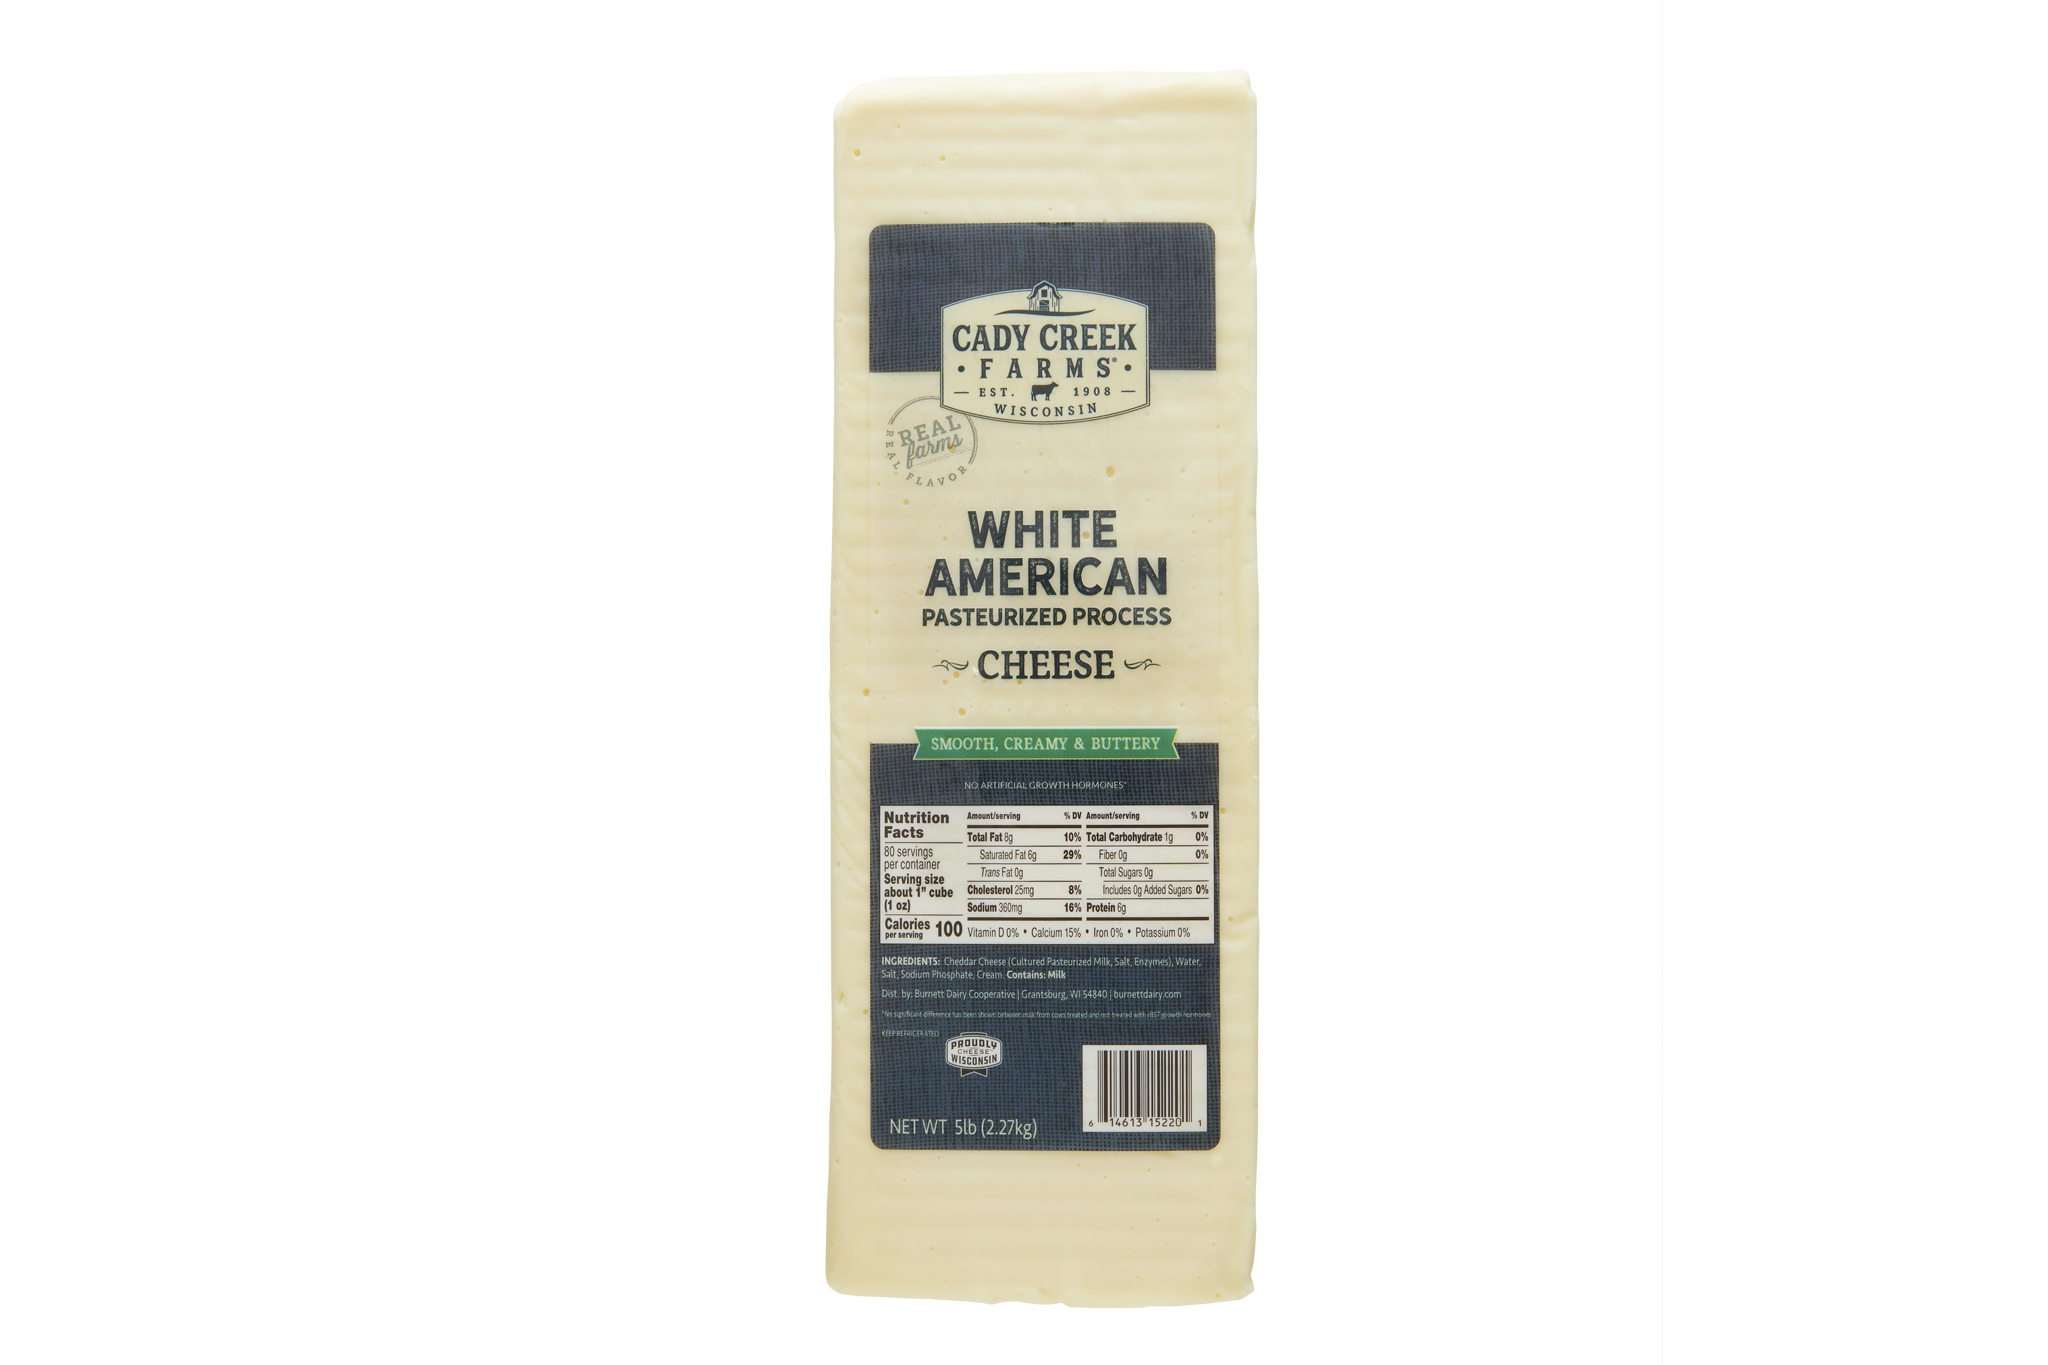 Cady Creek Farms 5 lb white american in package